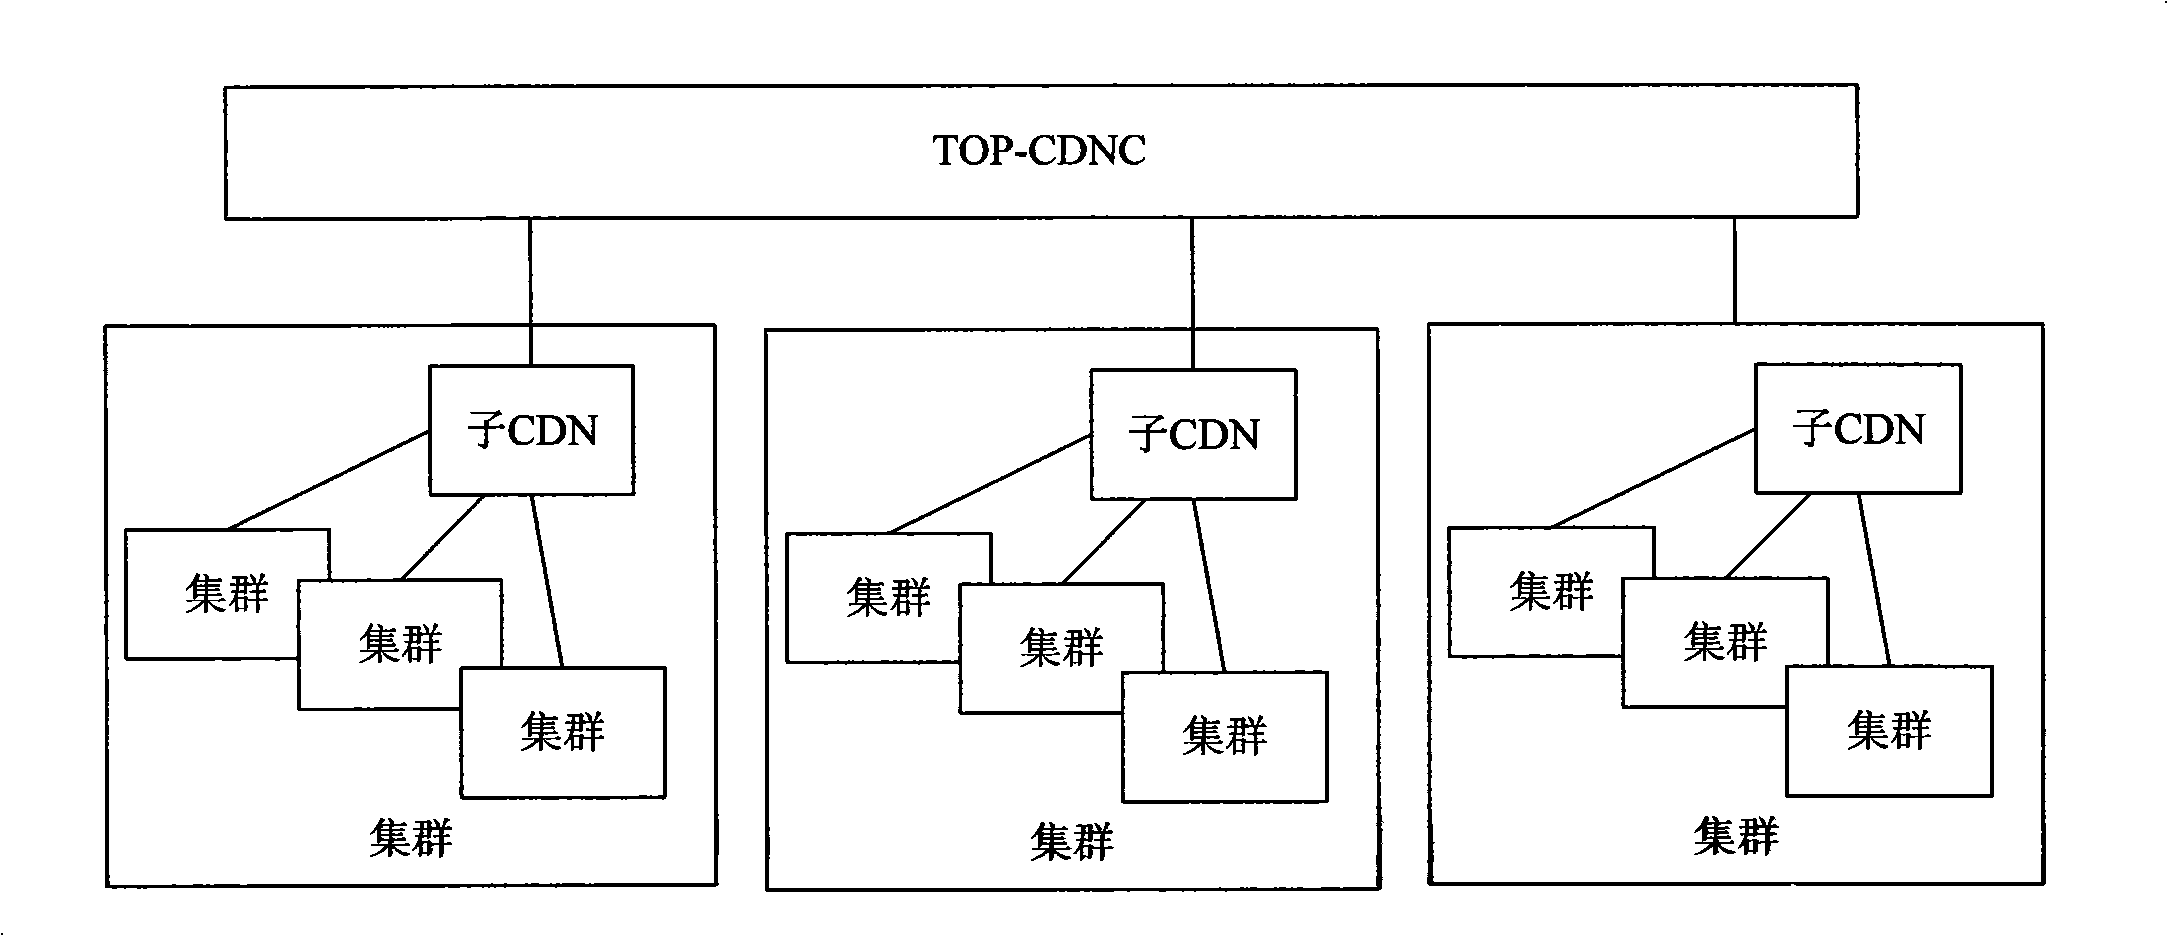 Method and device for distributing contents and network system for distributing contents